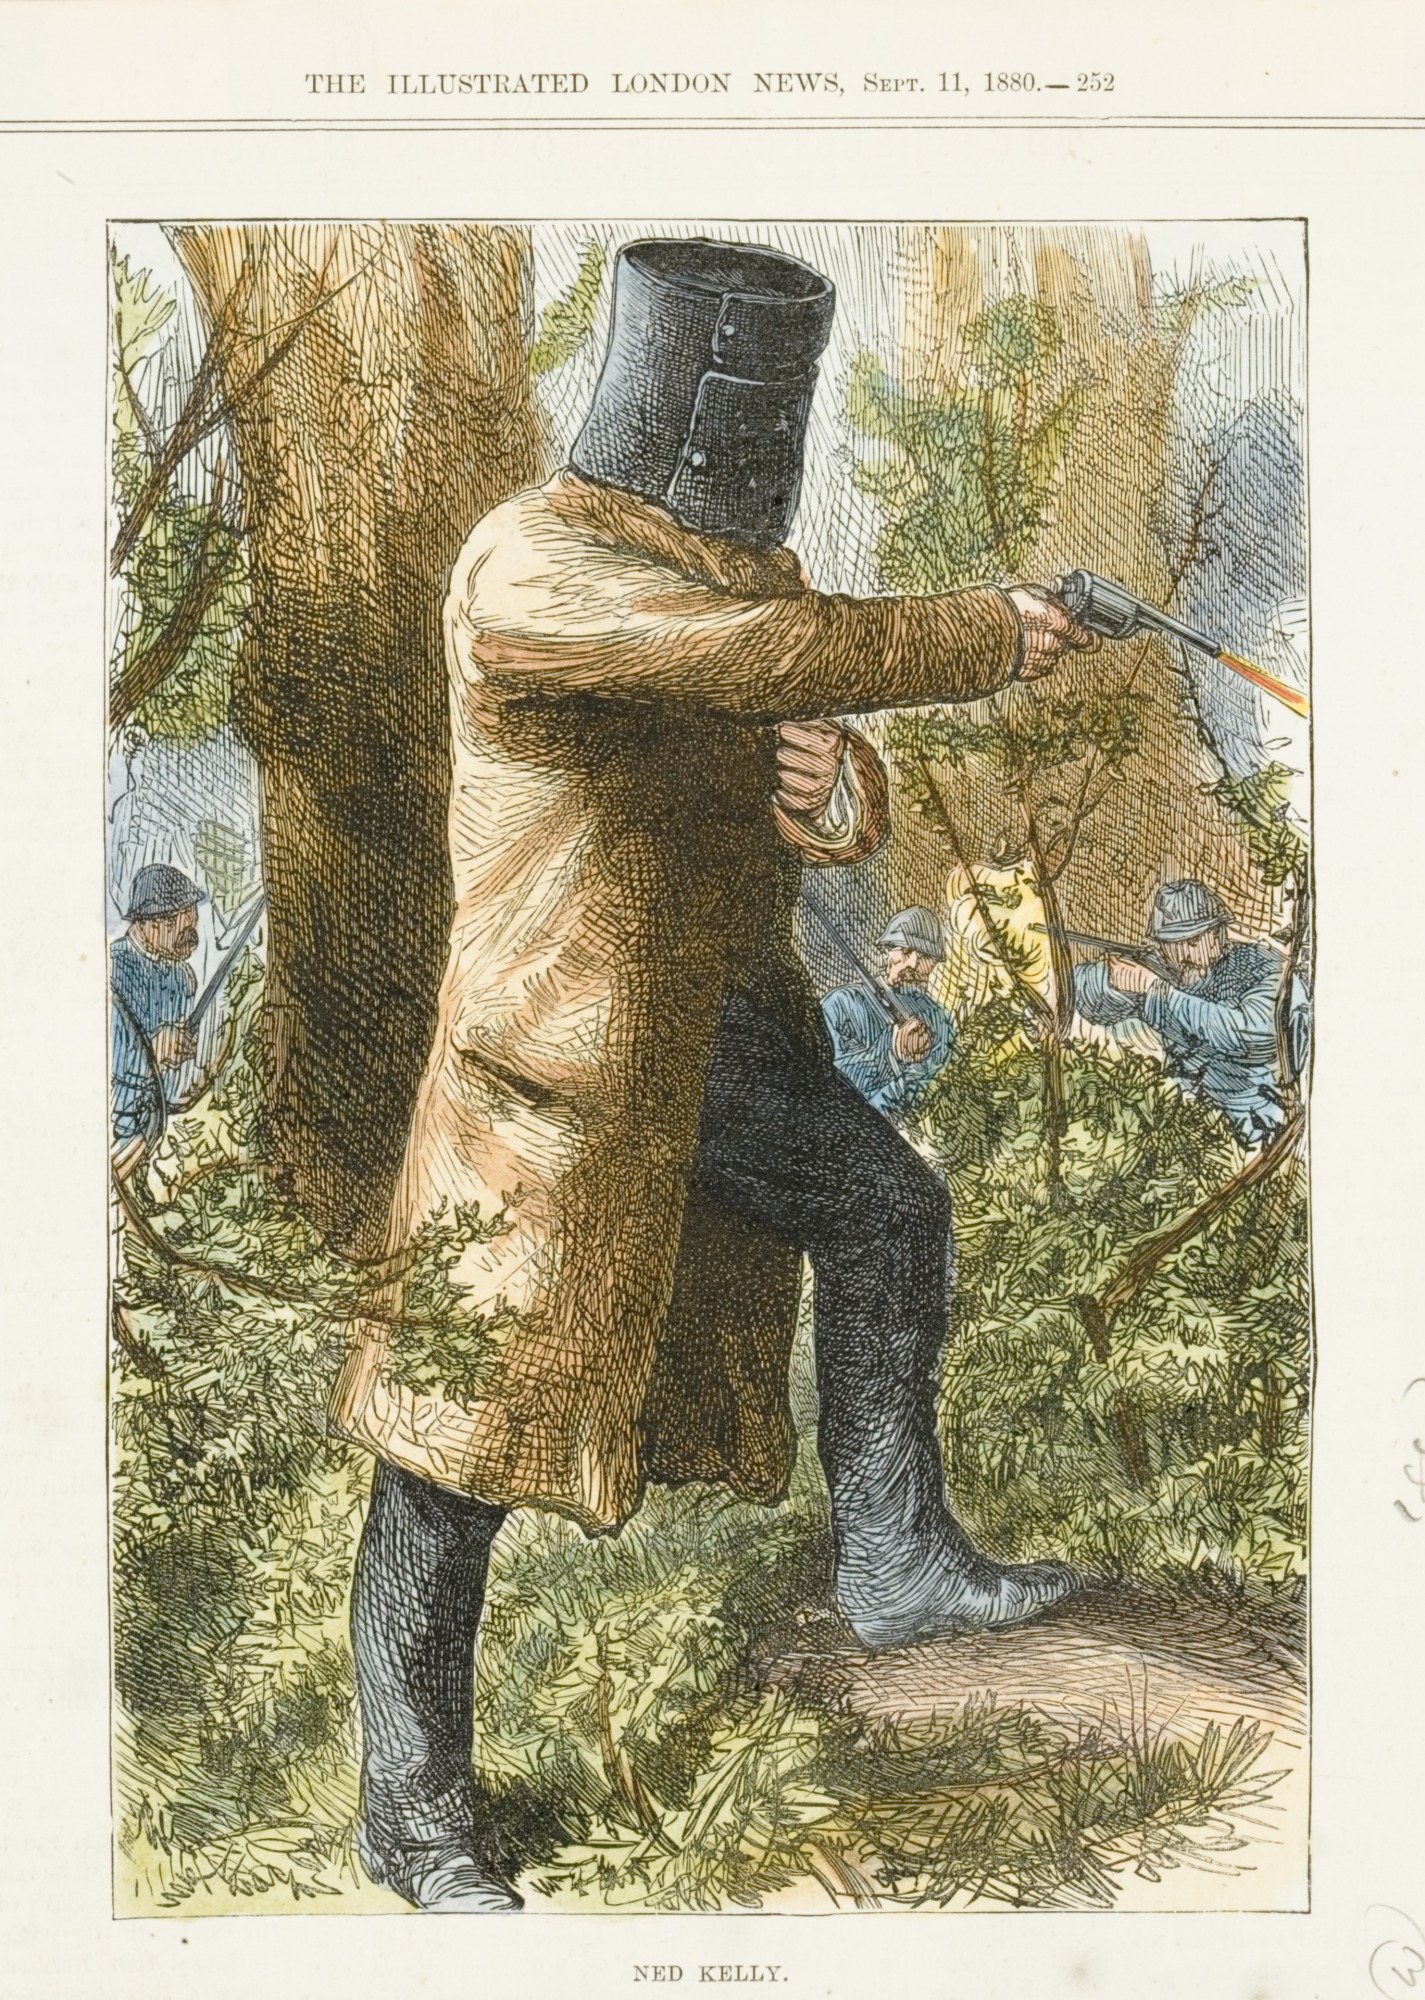 Woodcut of Ned Kelly, The Illustrated London News. 